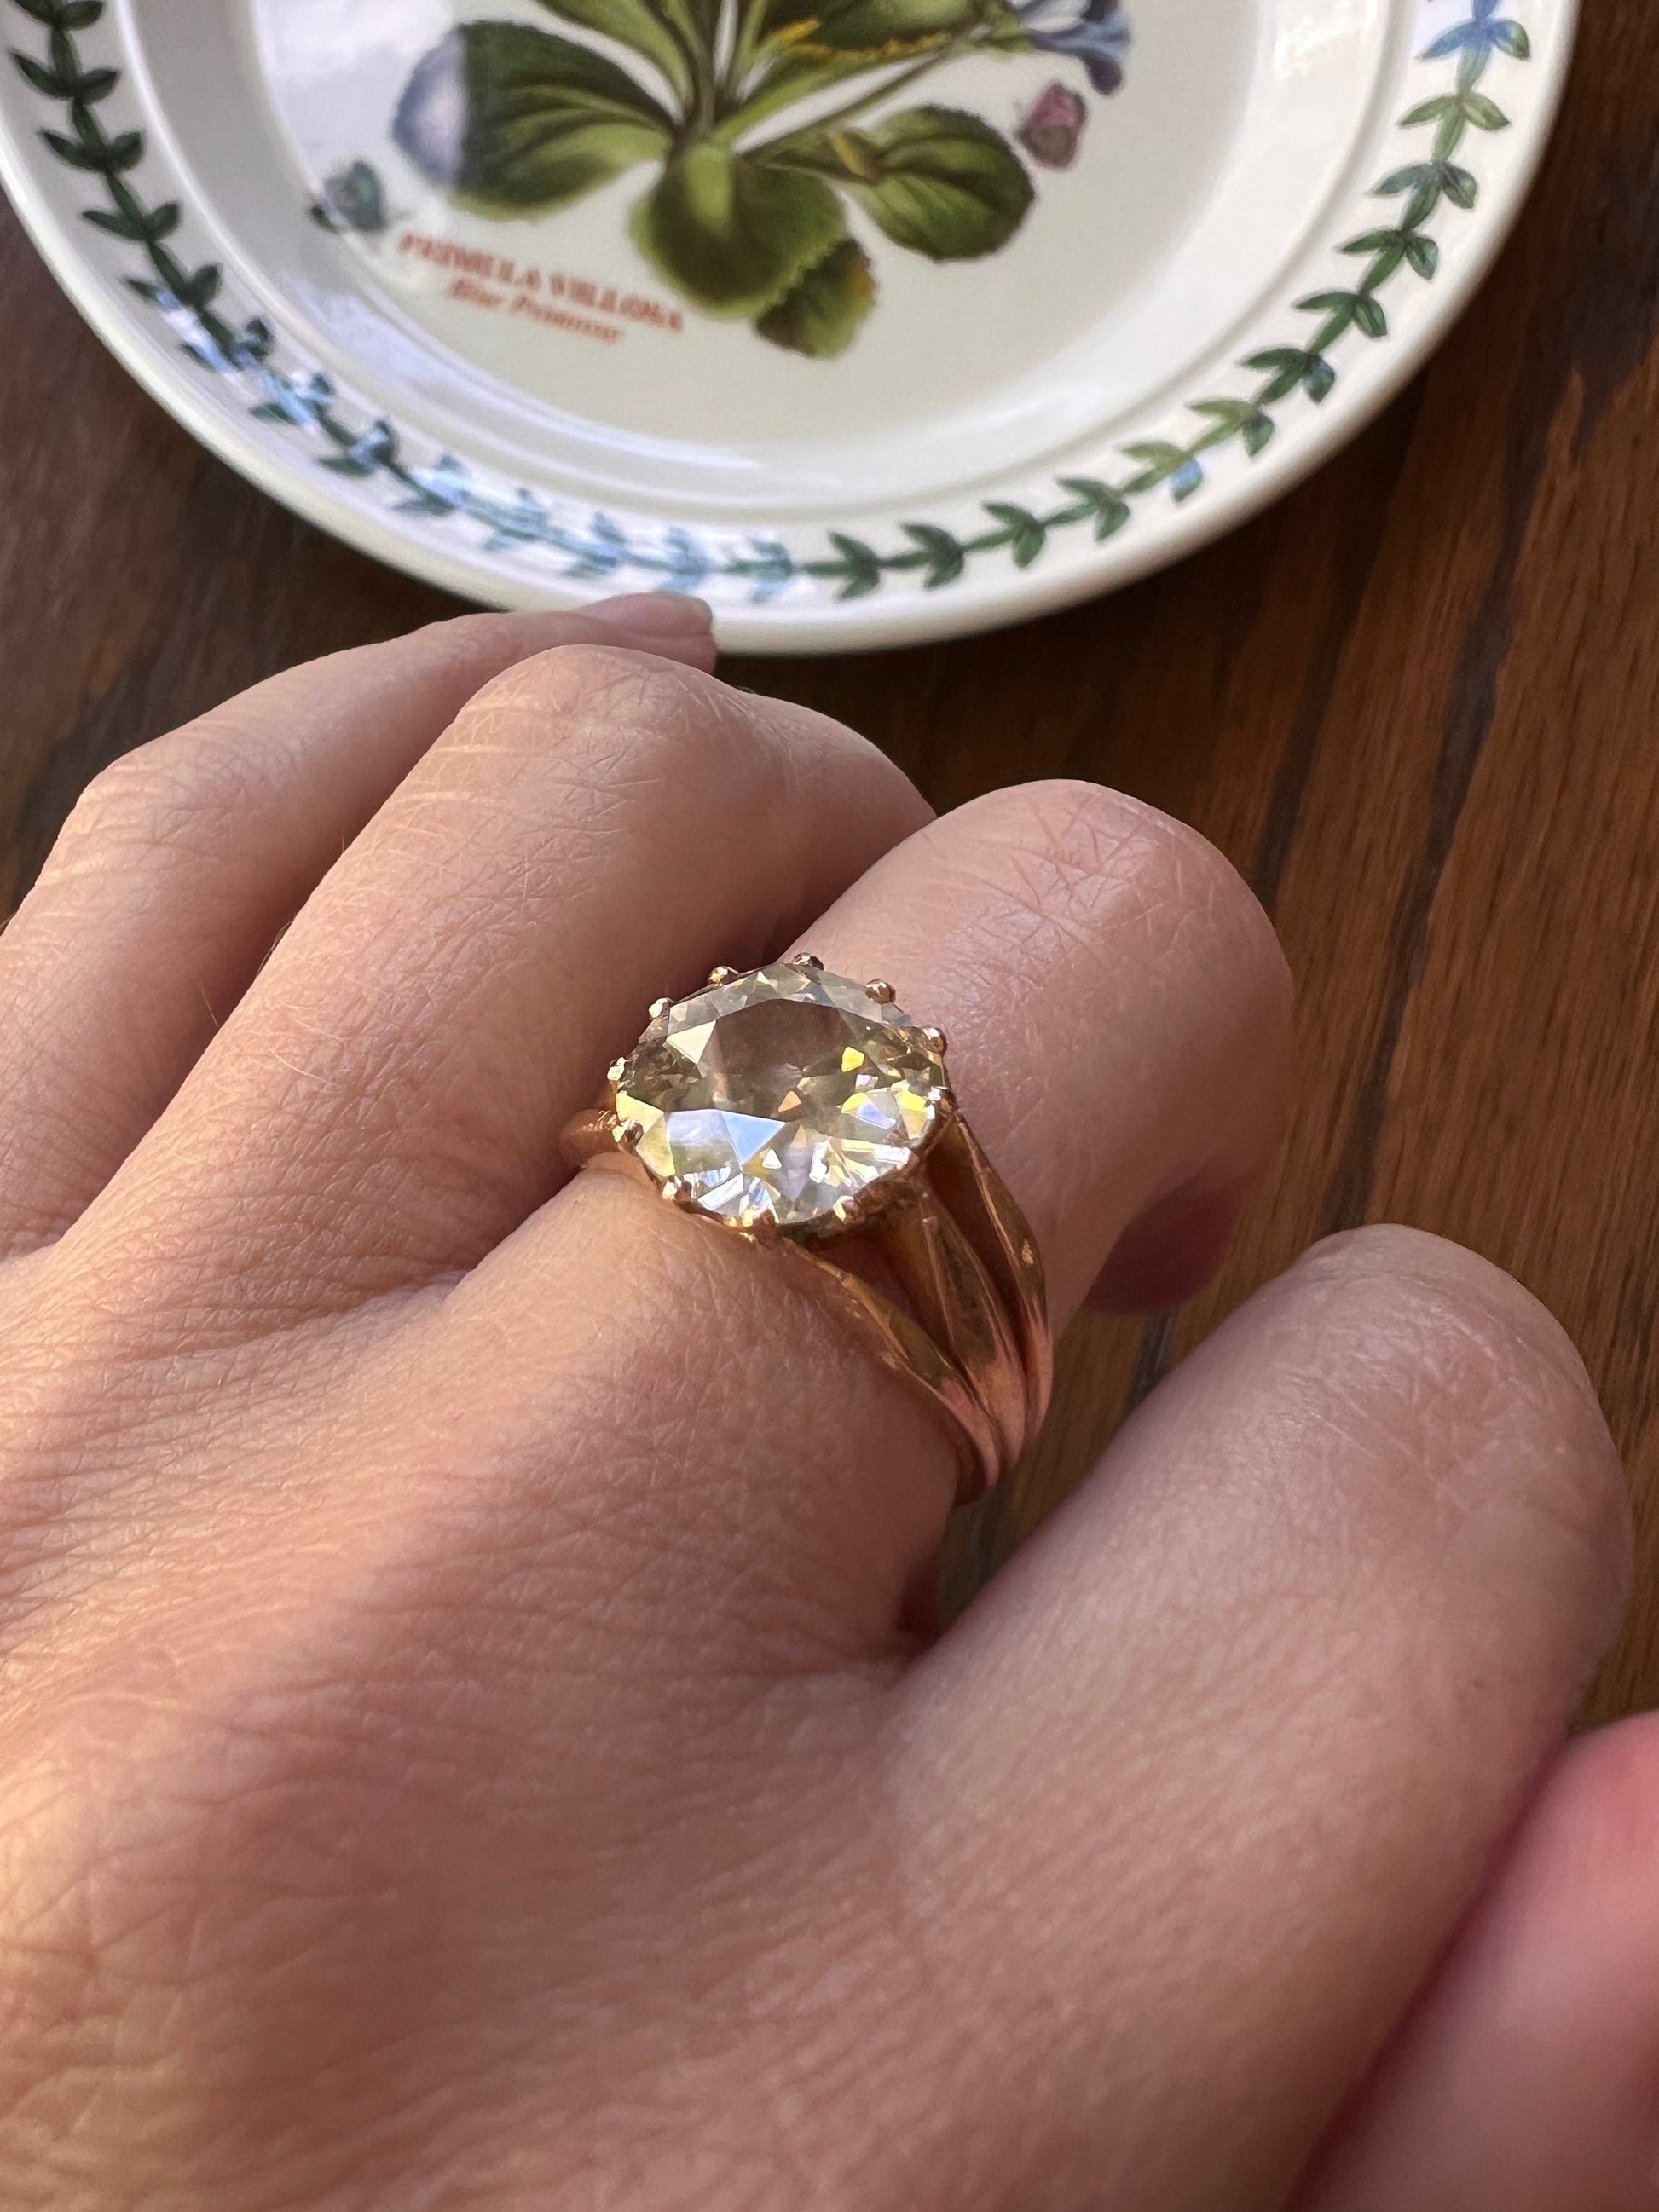 ANTIQUE Large 2.5 Carat Old European Cut DIAMOND Solitaire Ring Pale Yellow Light Brown 18k Rose Gold c1900 Victorian French Belle Epoque